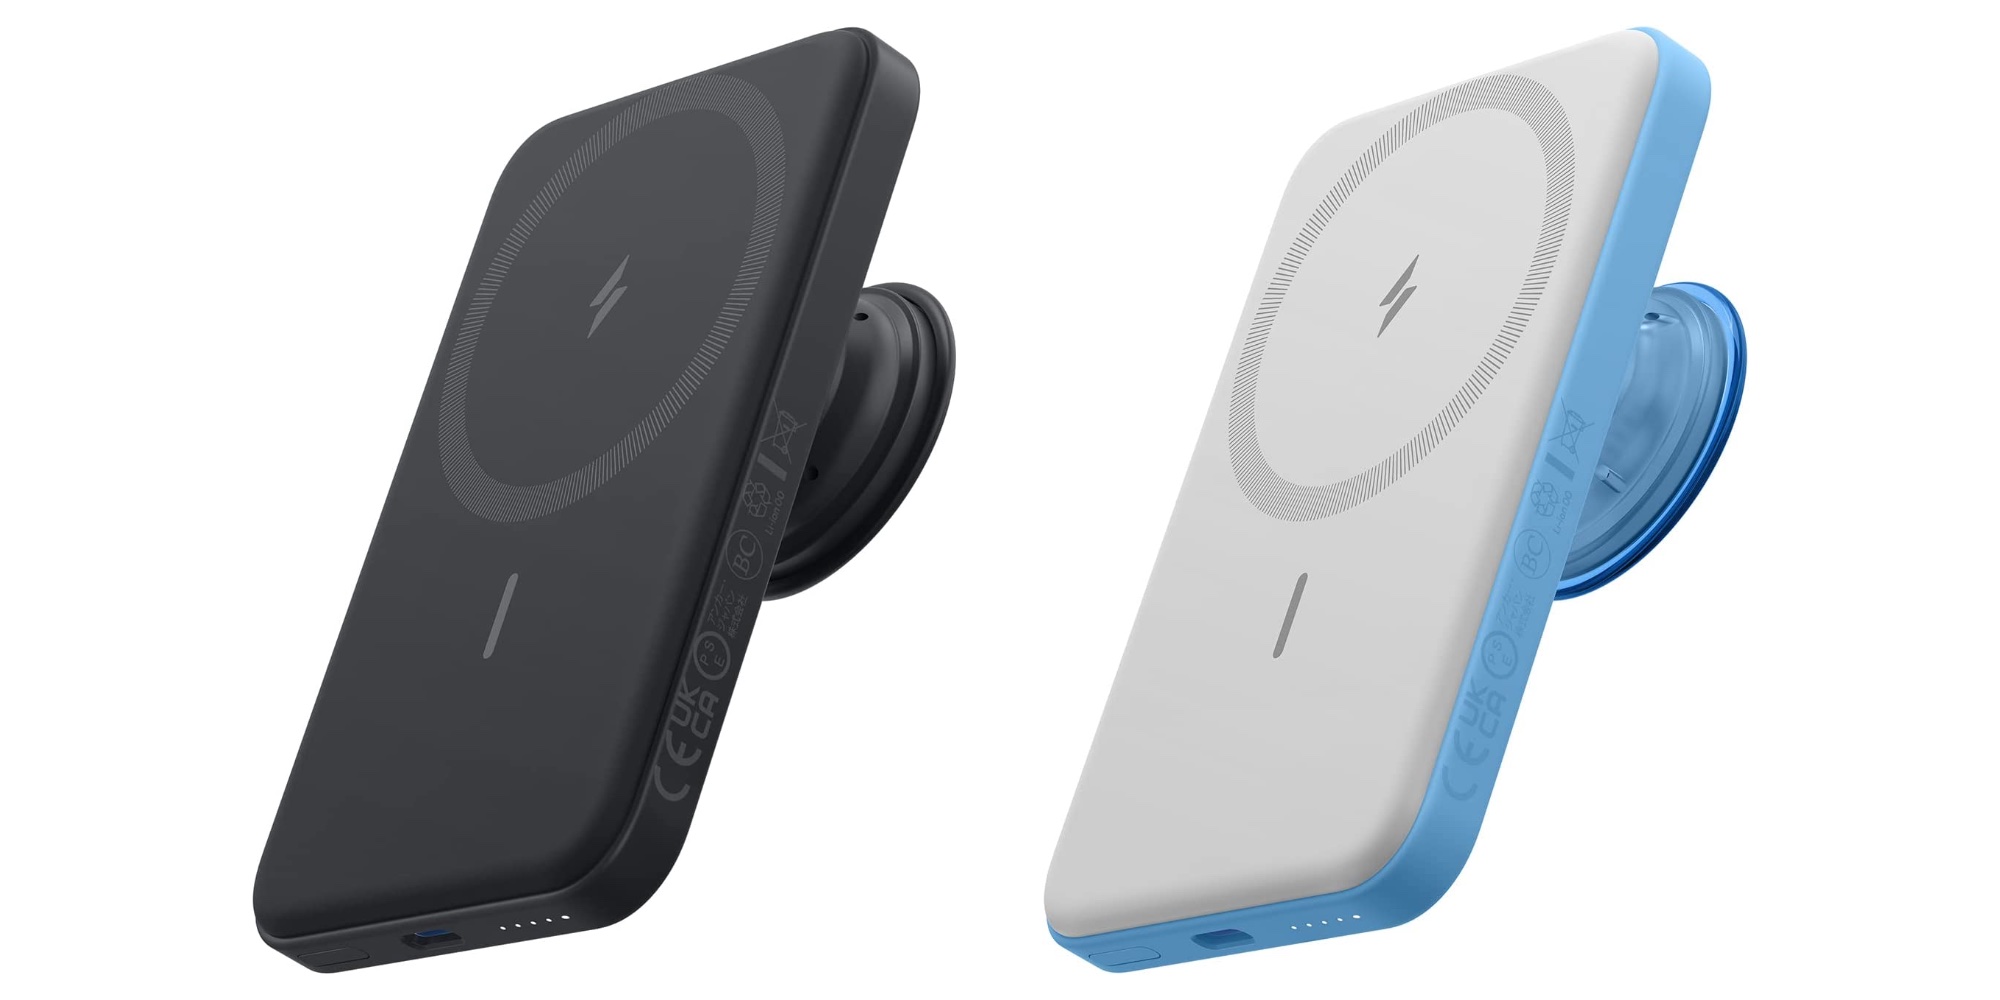 Anker PopSocket MagSafe power bank debuts with